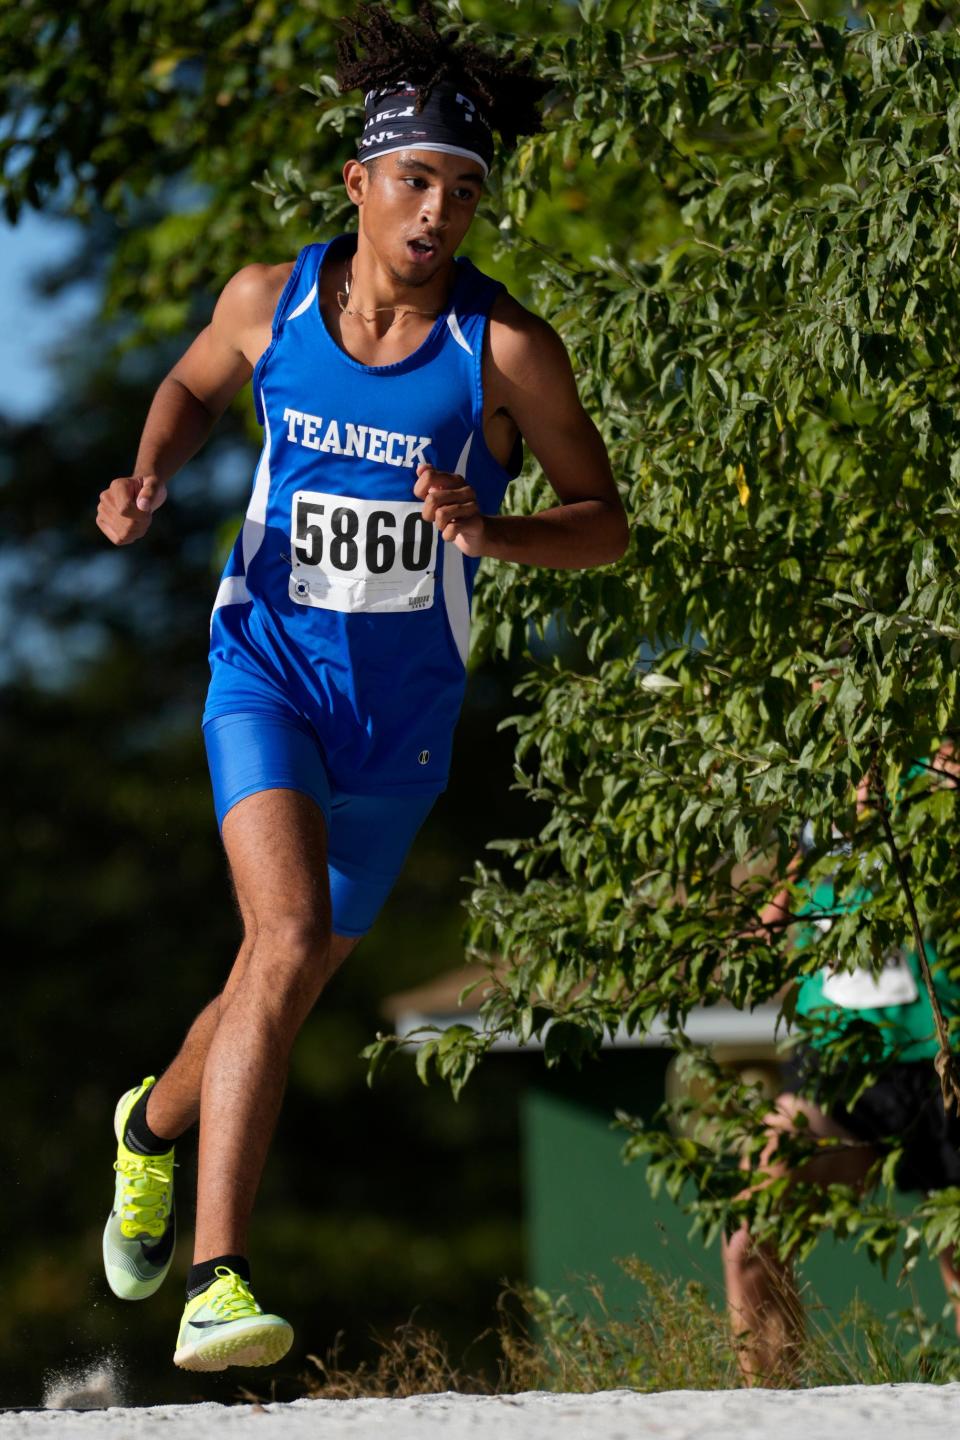 Joshua Tejada, of Teaneck, is shown on his way to a first place finish, in the National boys race starts at, Darlington County Park, in Mahwah.  Thursday, September, 29, 2022